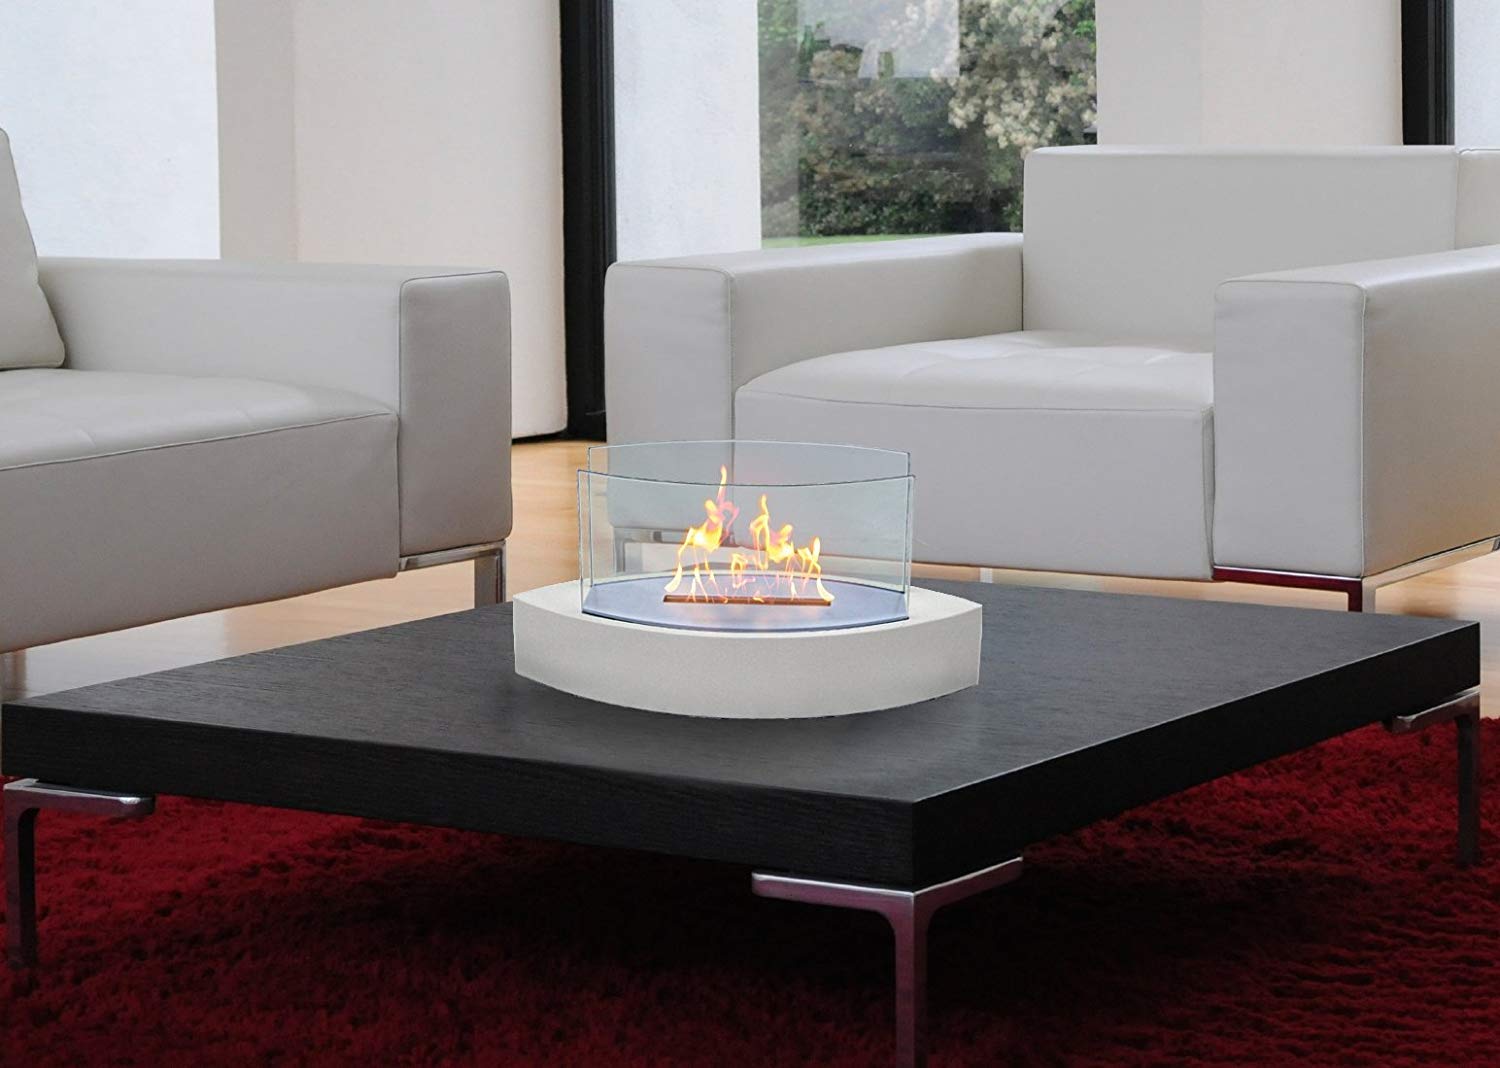 Heat Shield to Protect Tv Over Fireplace Beautiful Anywhere Fireplace Lexington Tabletop Bio Ethanol Clean Burning Eco Friendly Fireplace In High Gloss White